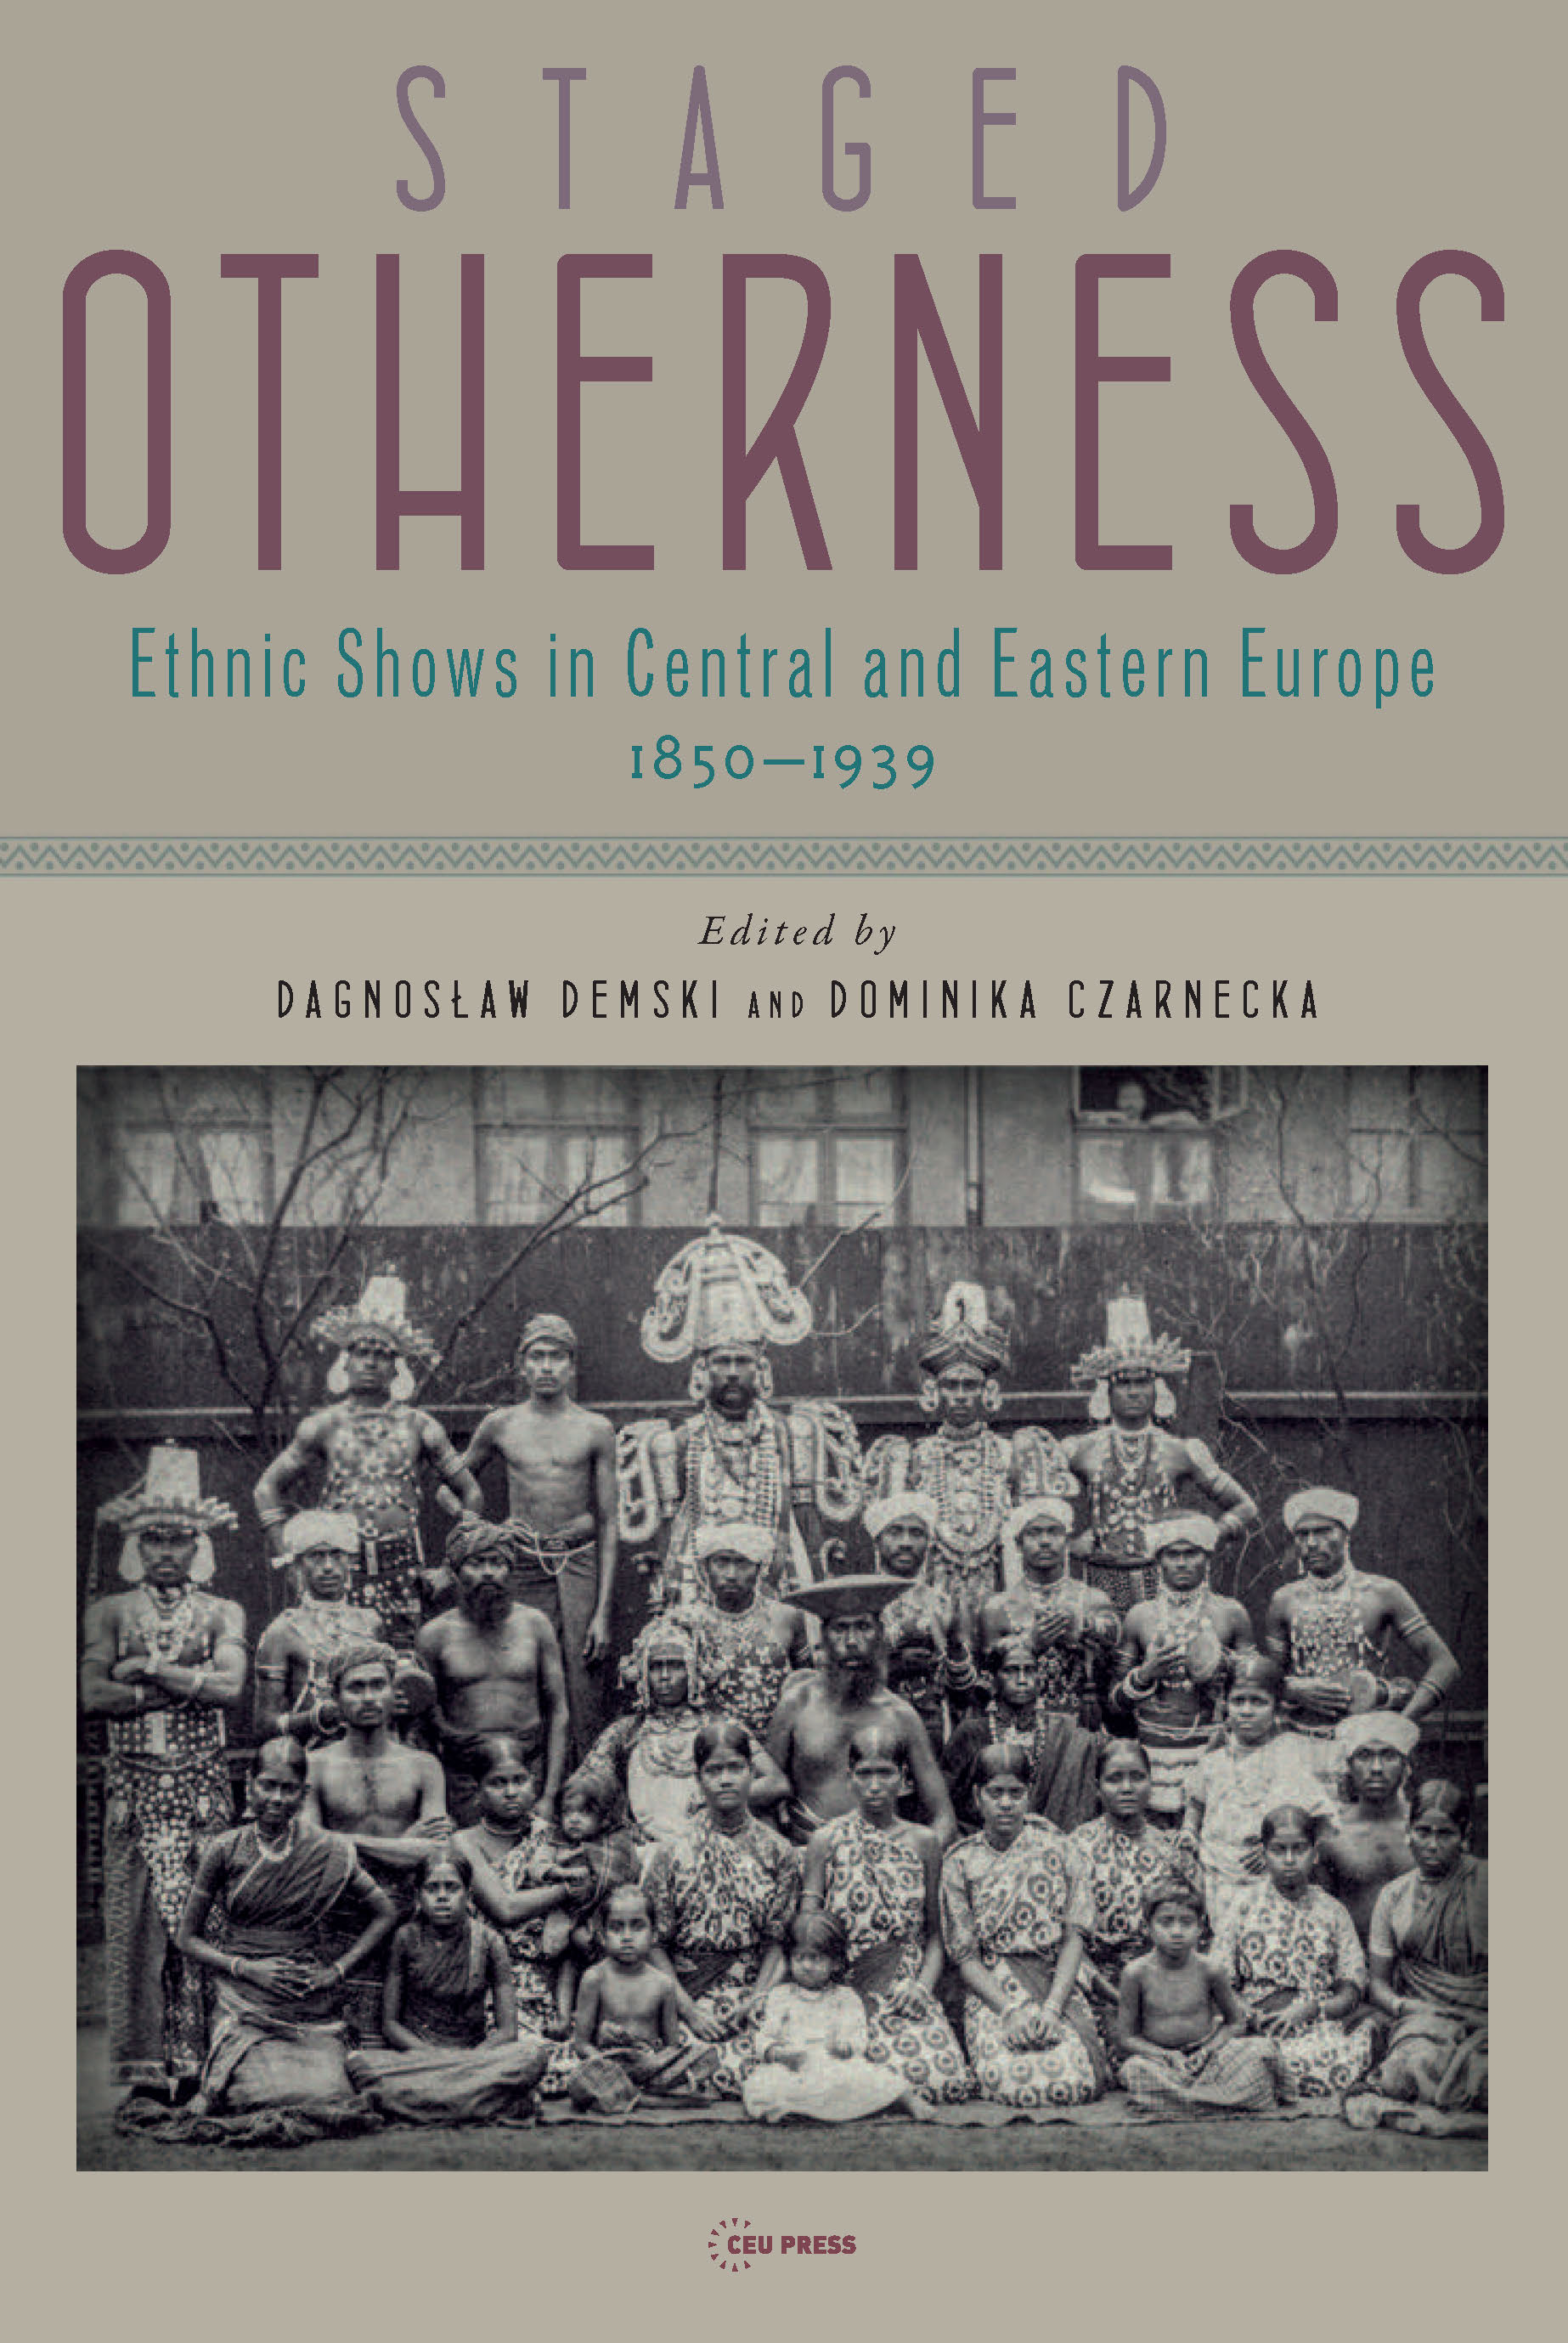 cover image of Staged Otherness book